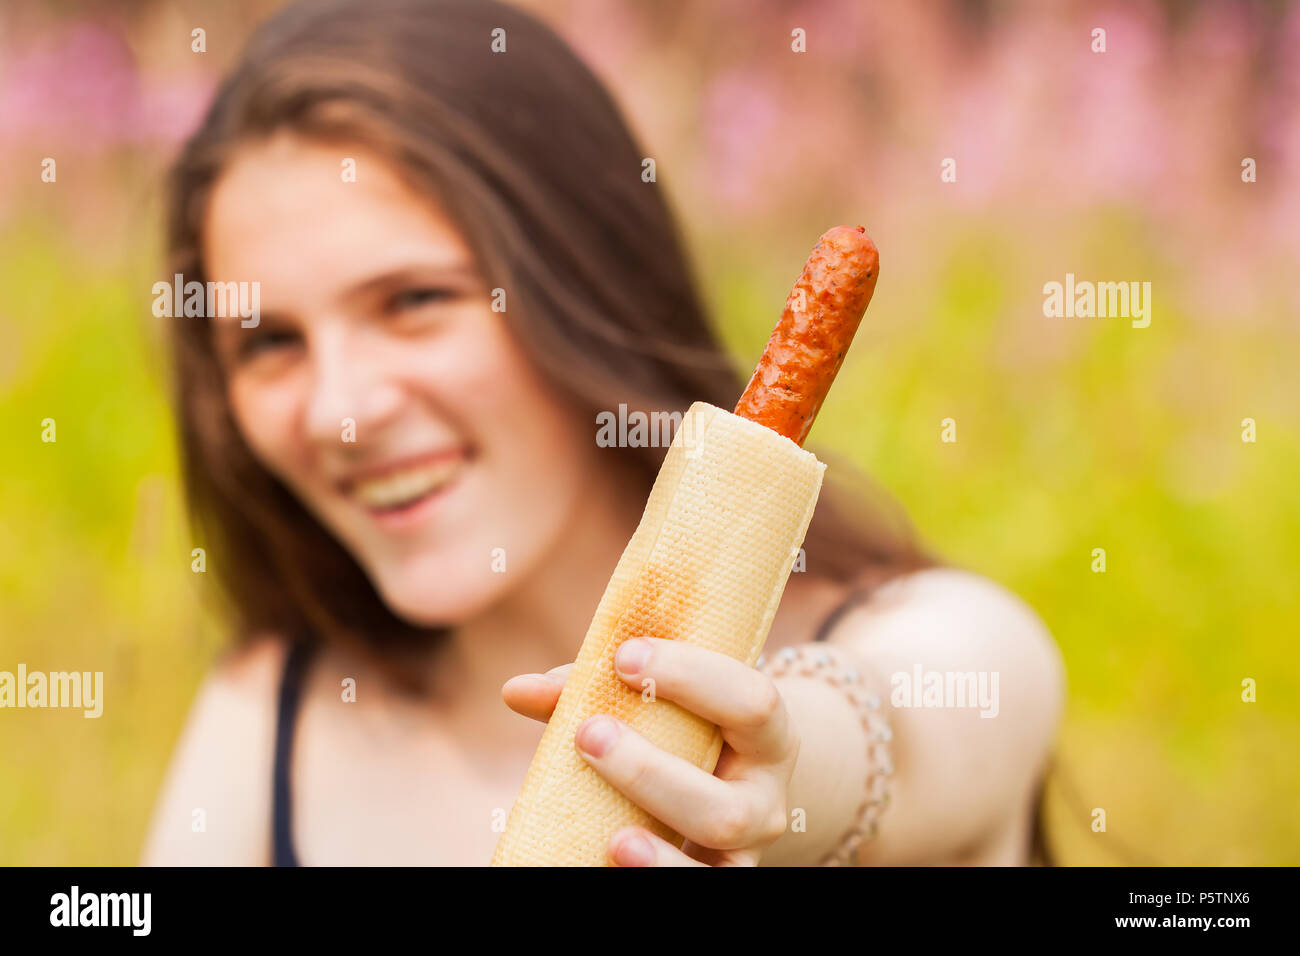 Young smiling girl offering a hot dog for us, focus on it. Summer sunny day Stock Photo